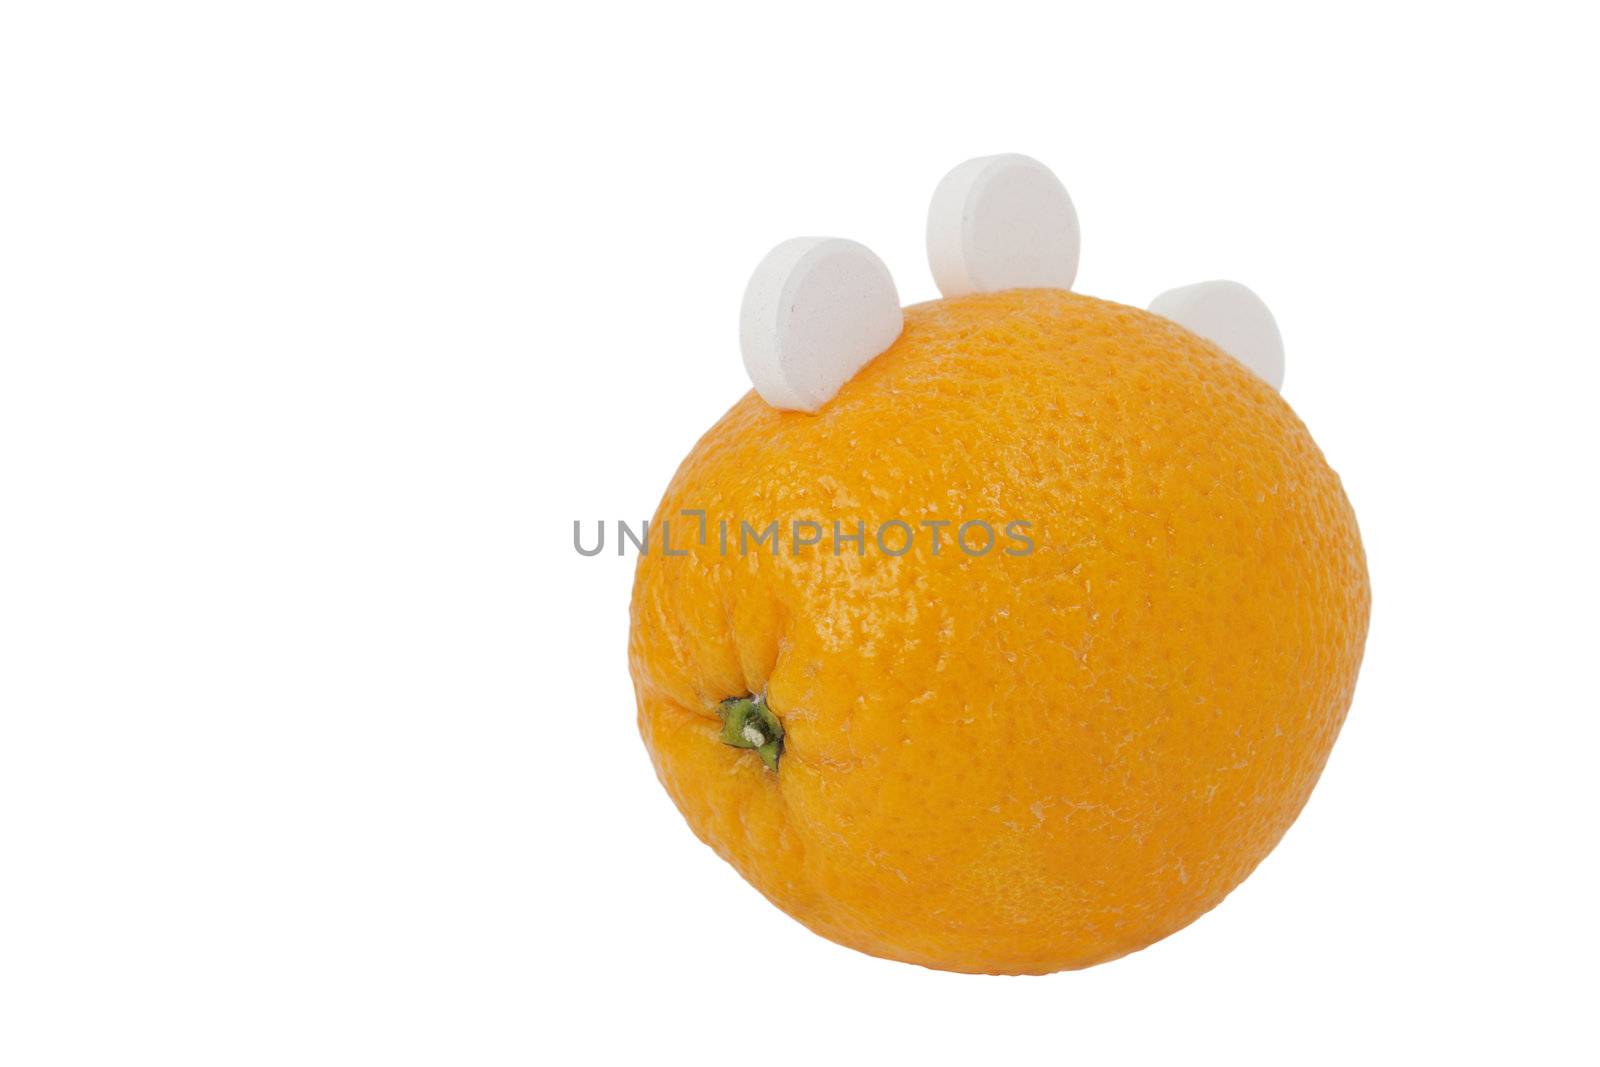 Orange with tablets of vitamin c on white background by pulen